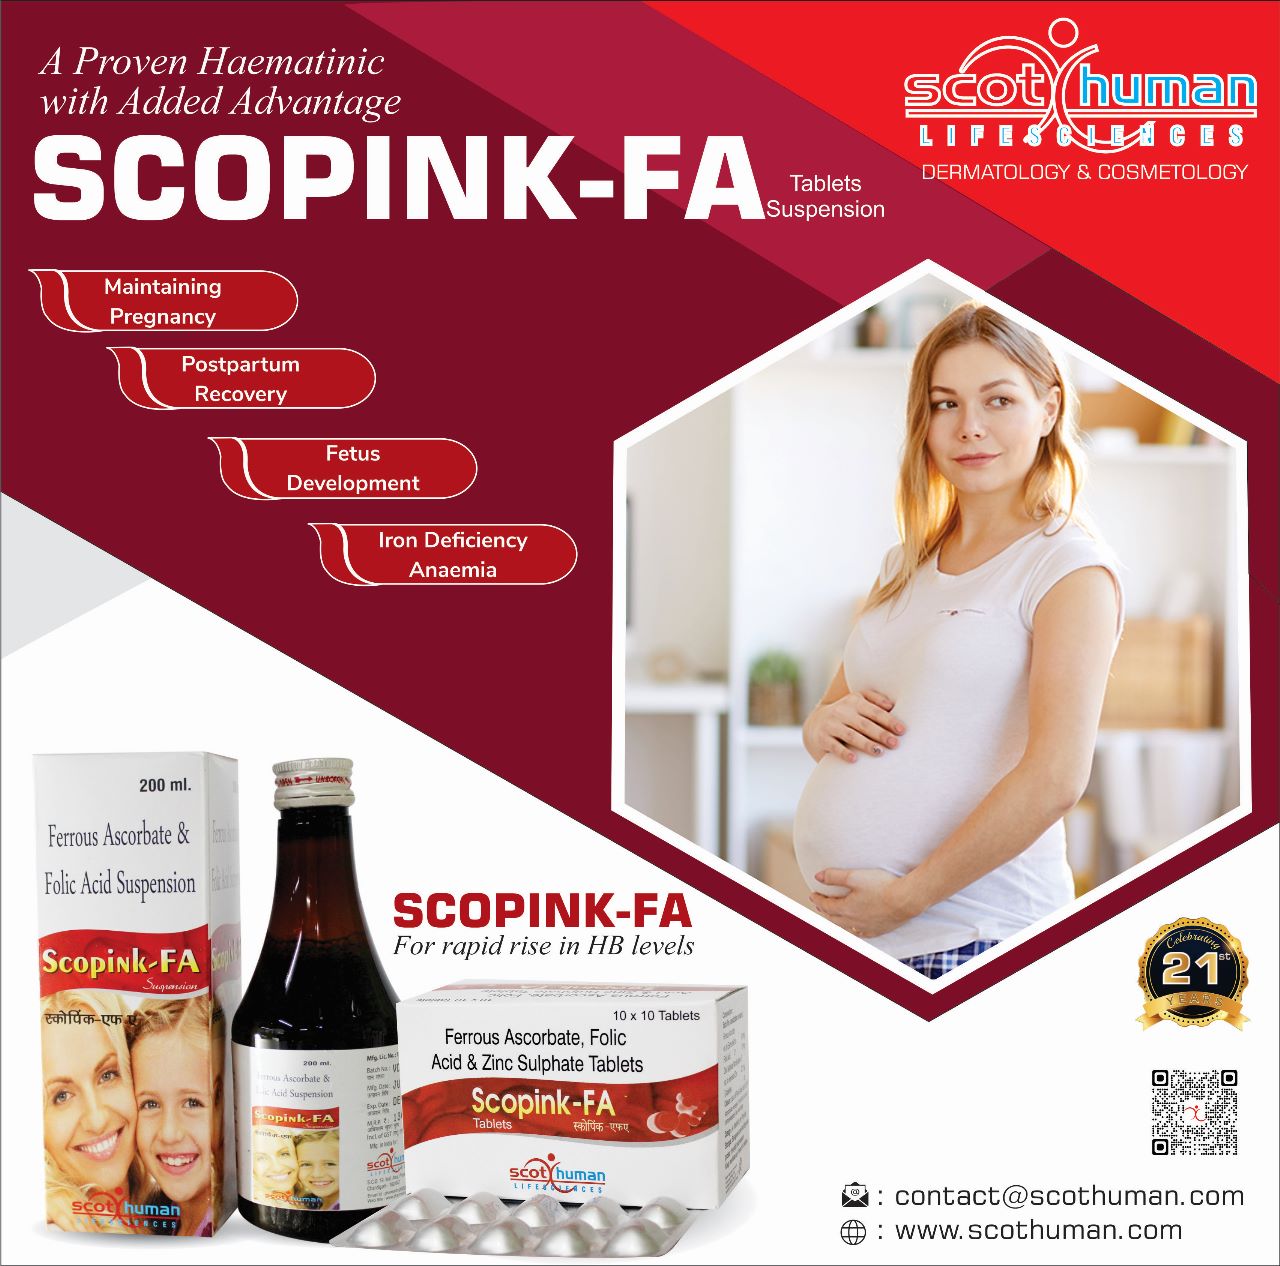 Product Name: Scopink FA, Compositions of Scopink FA are Ferrous Ascorbate & Folic Acid - Pharma Drugs and Chemicals